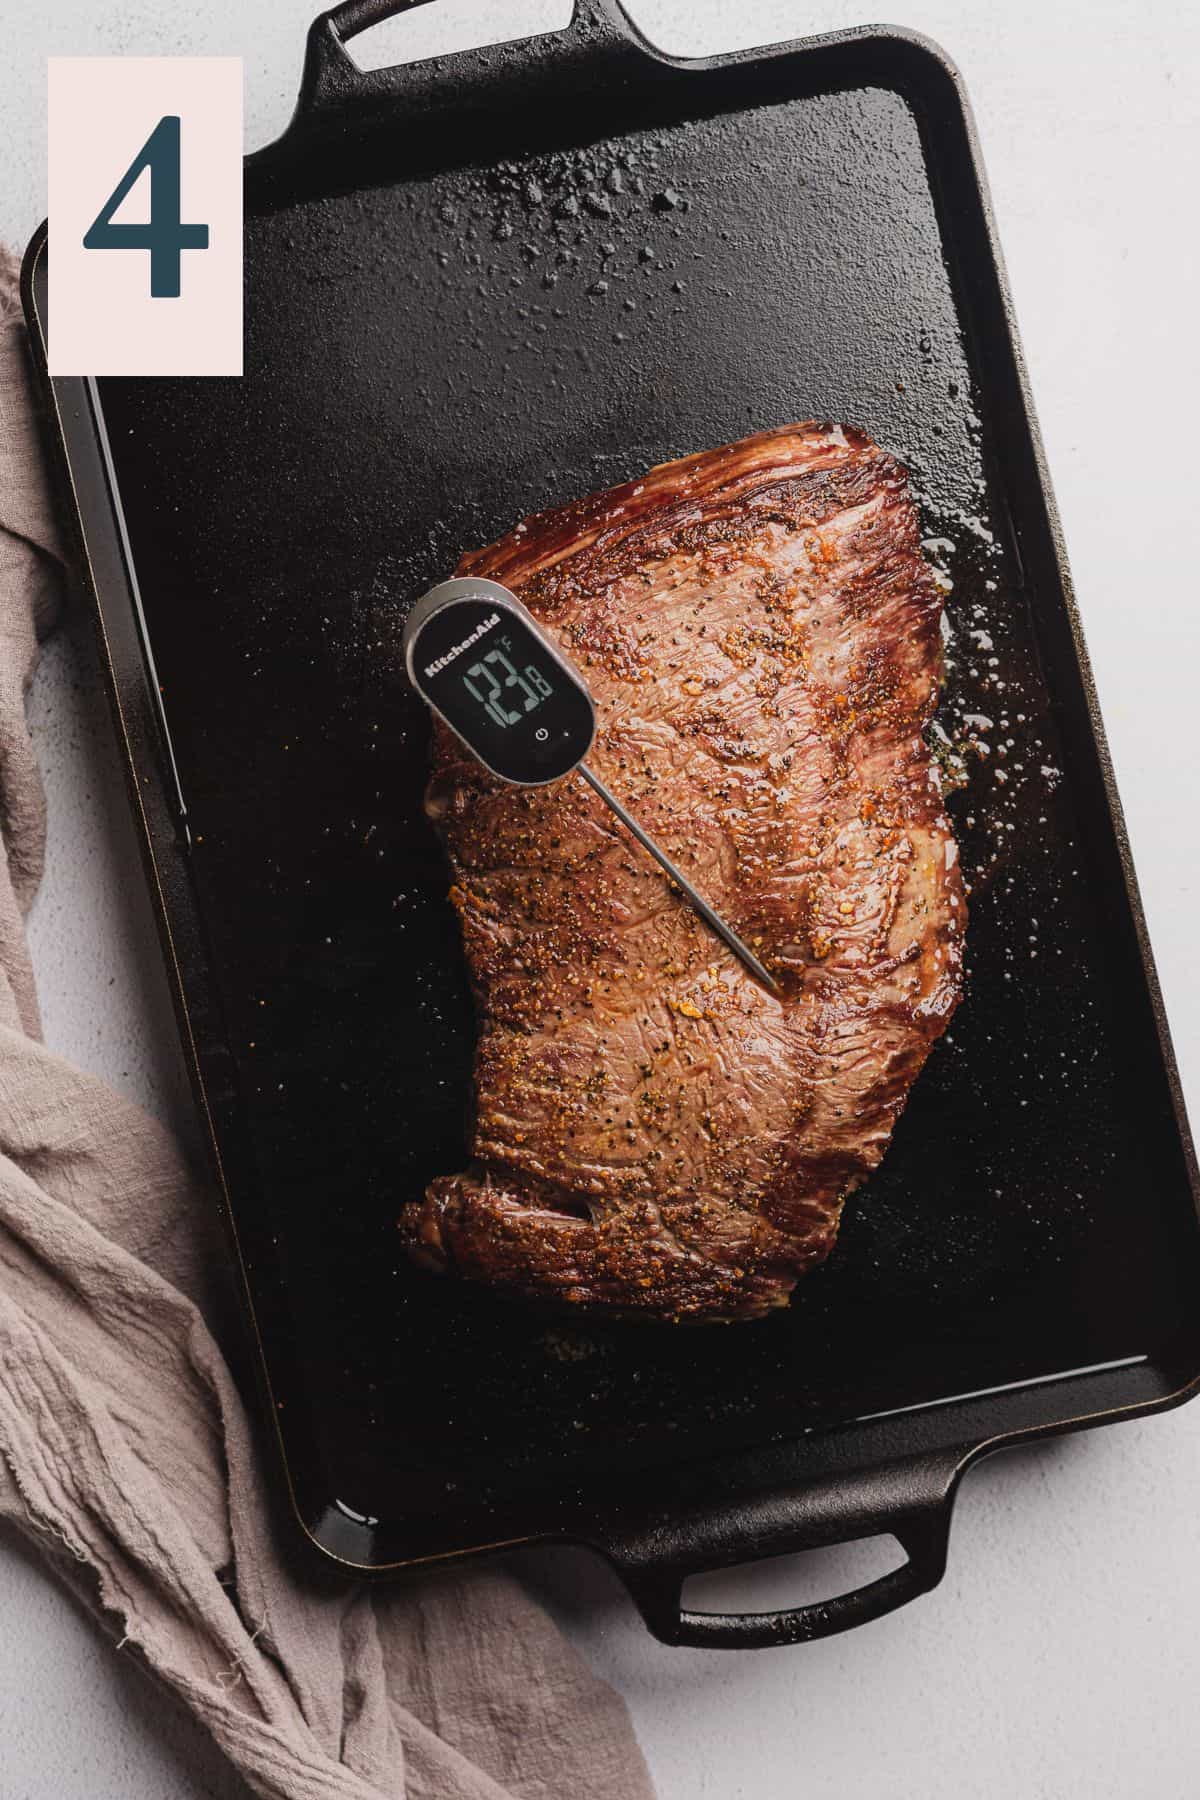 bavette steak on a grill pan cooked with a meat thermometer inside.